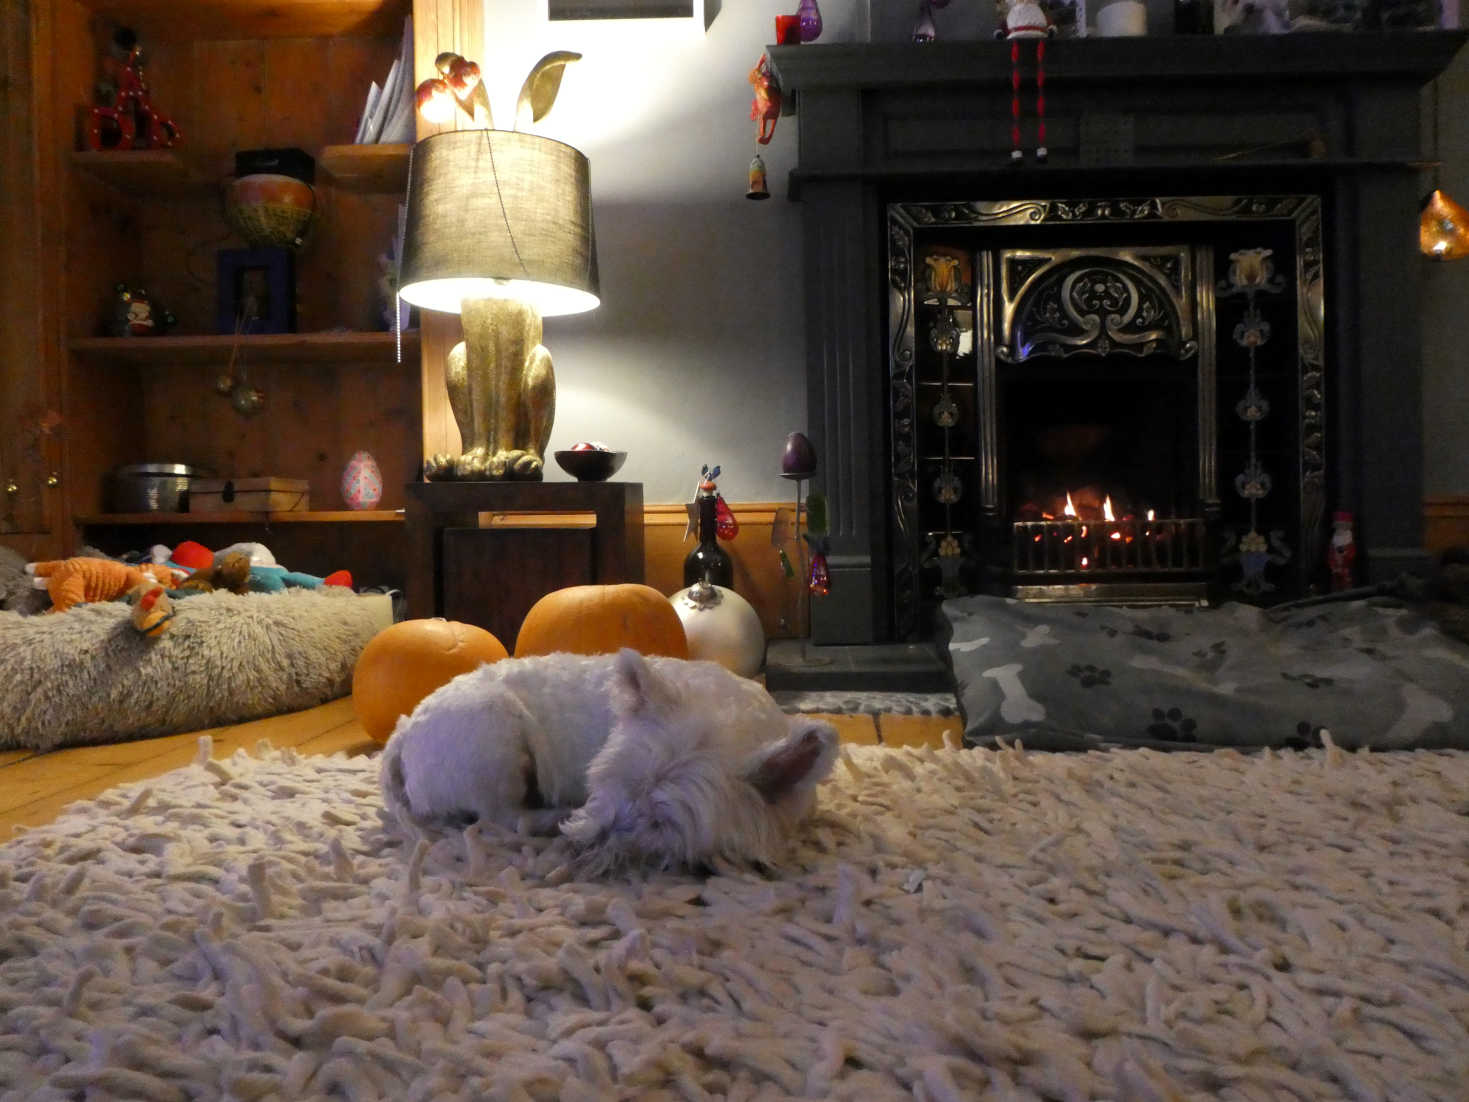 poppy the westie after dinner snooze